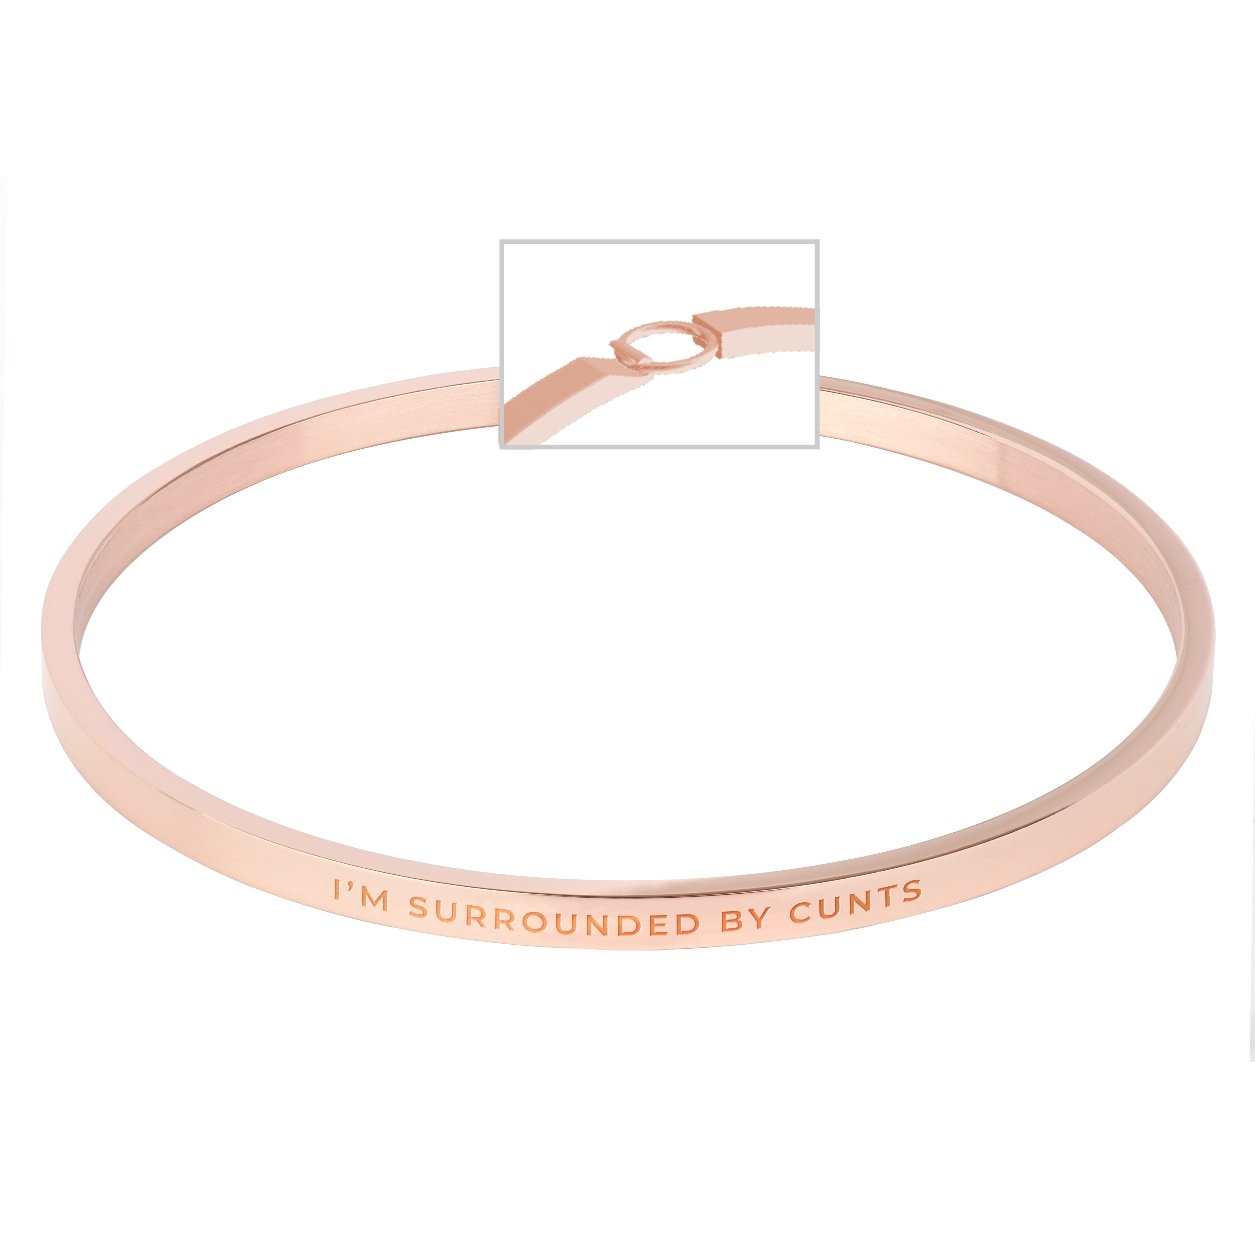 Rose gold Bangle - Surrounded by Cunts